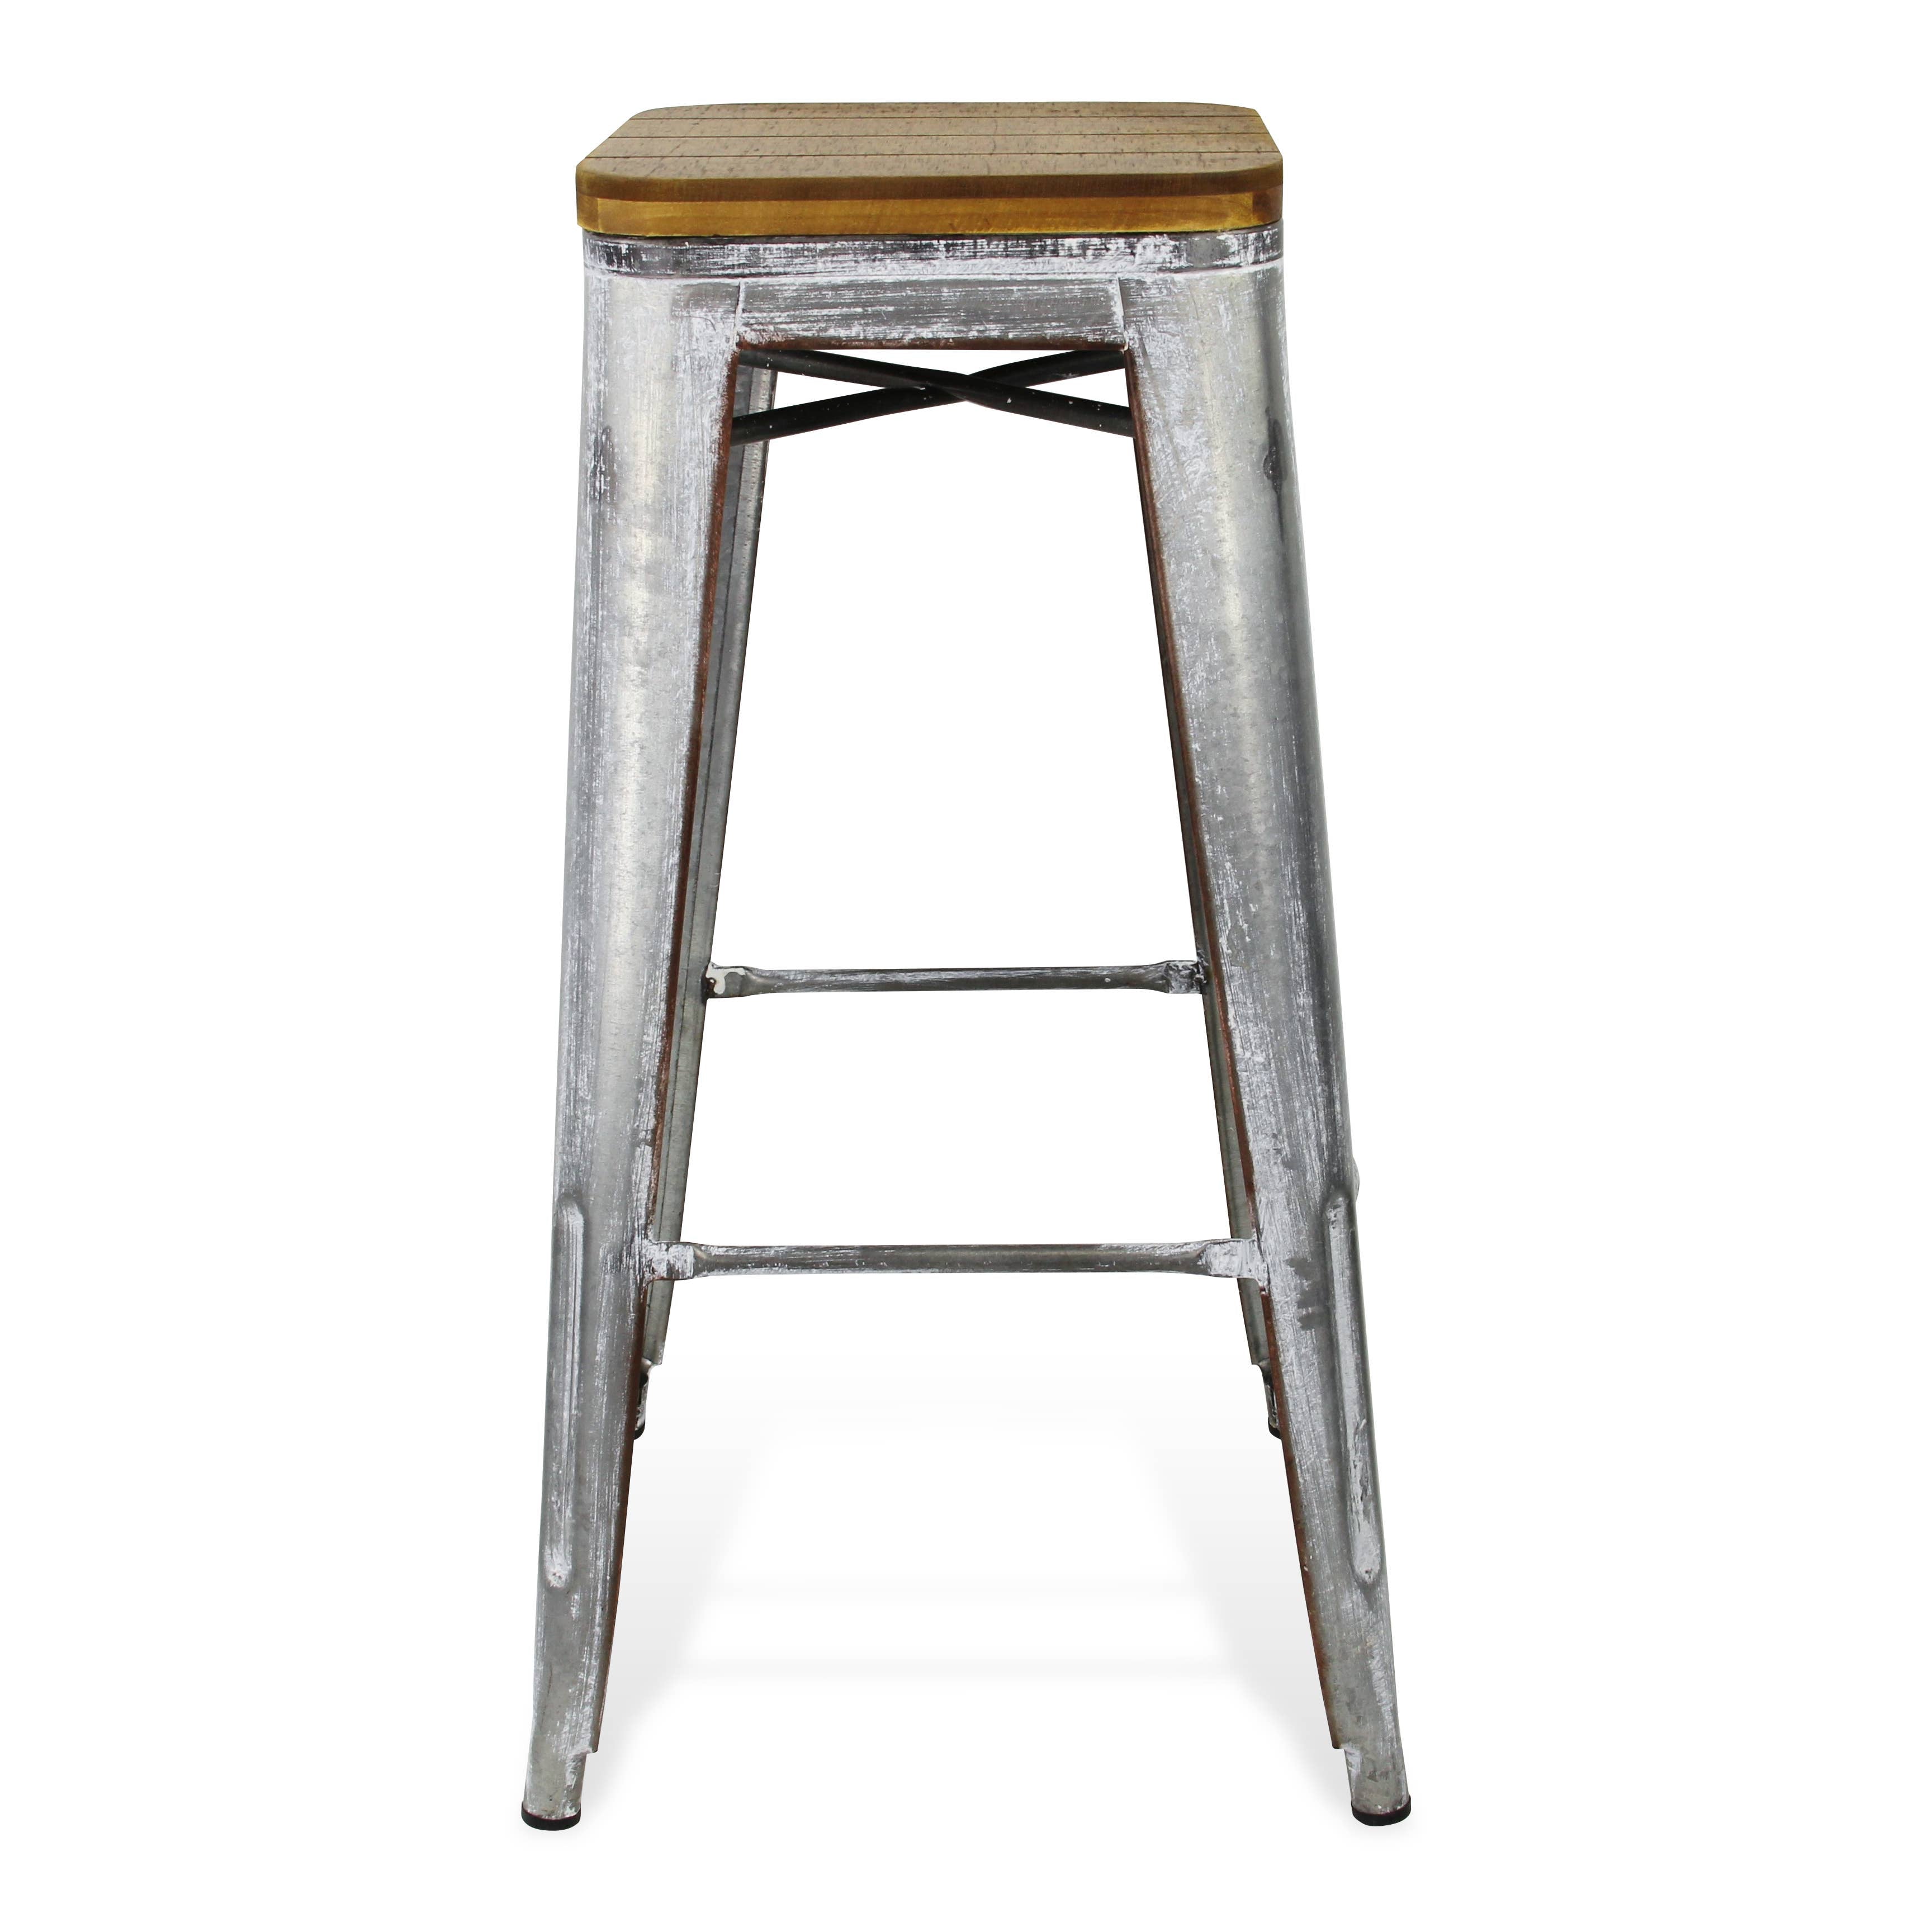 Bar Height Wooden Top Stools